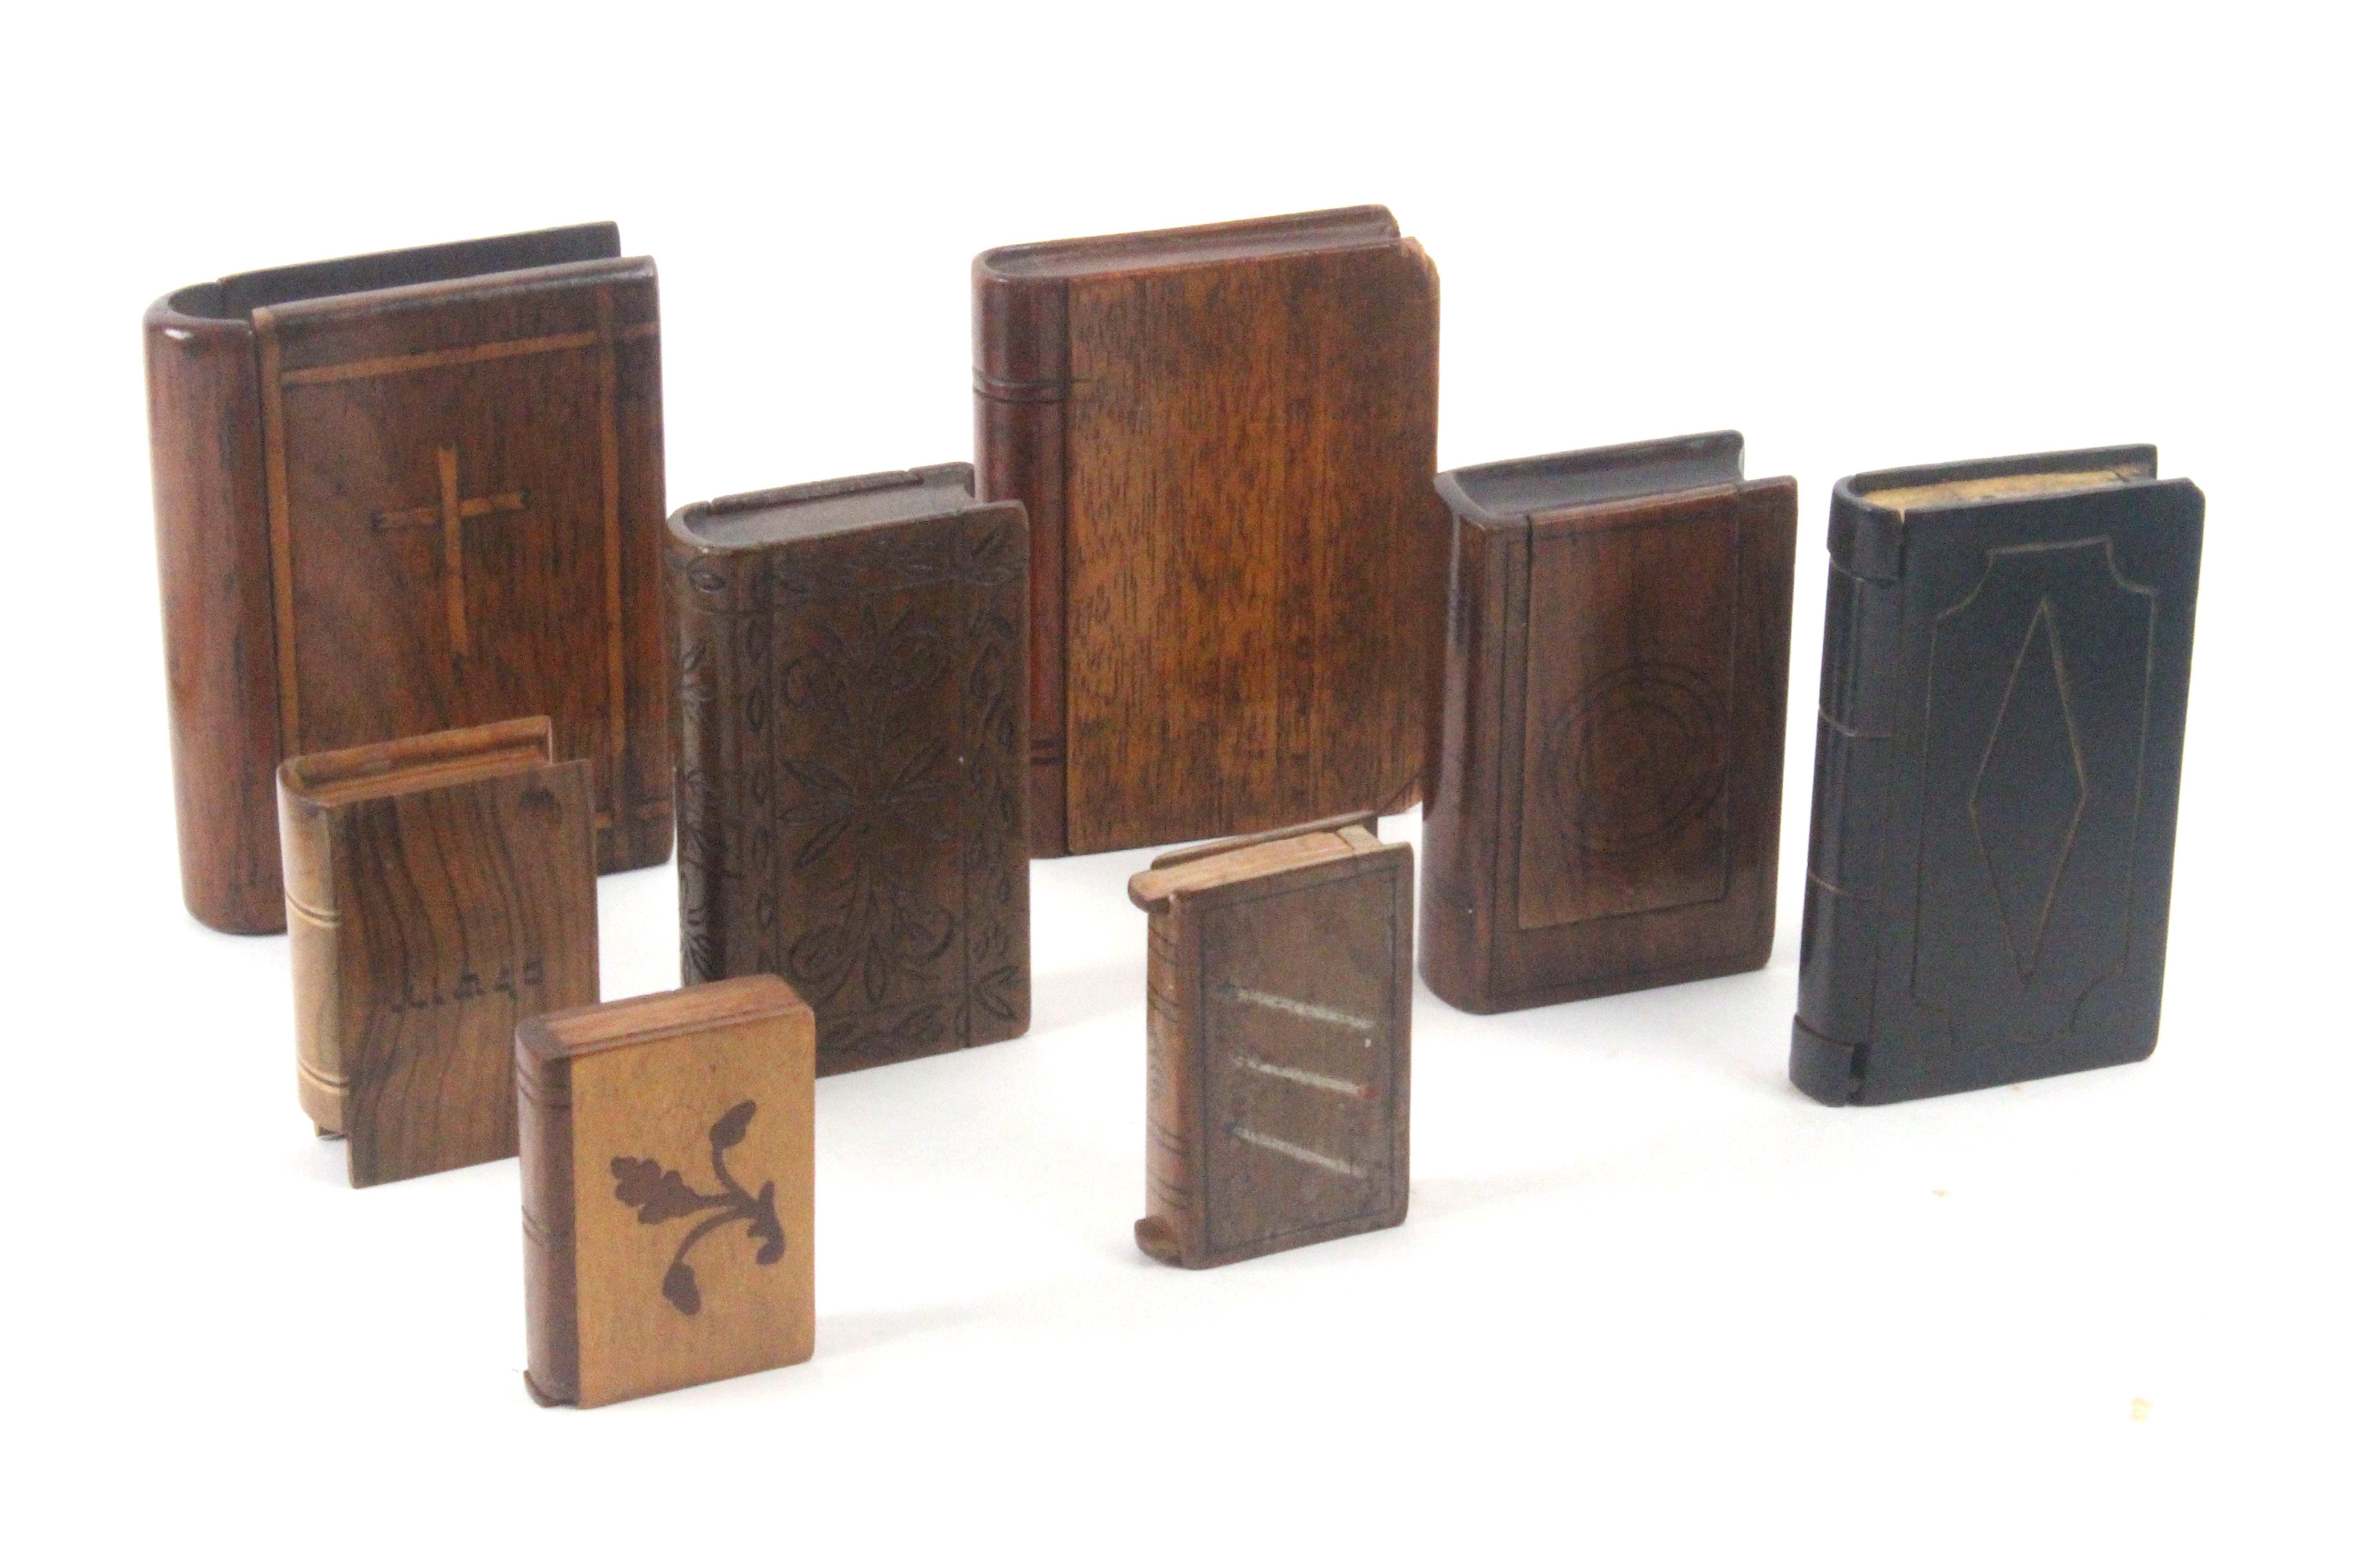 Eight book form wooden 'secret' boxes, comprising an early 19th Century hardwood example carved with